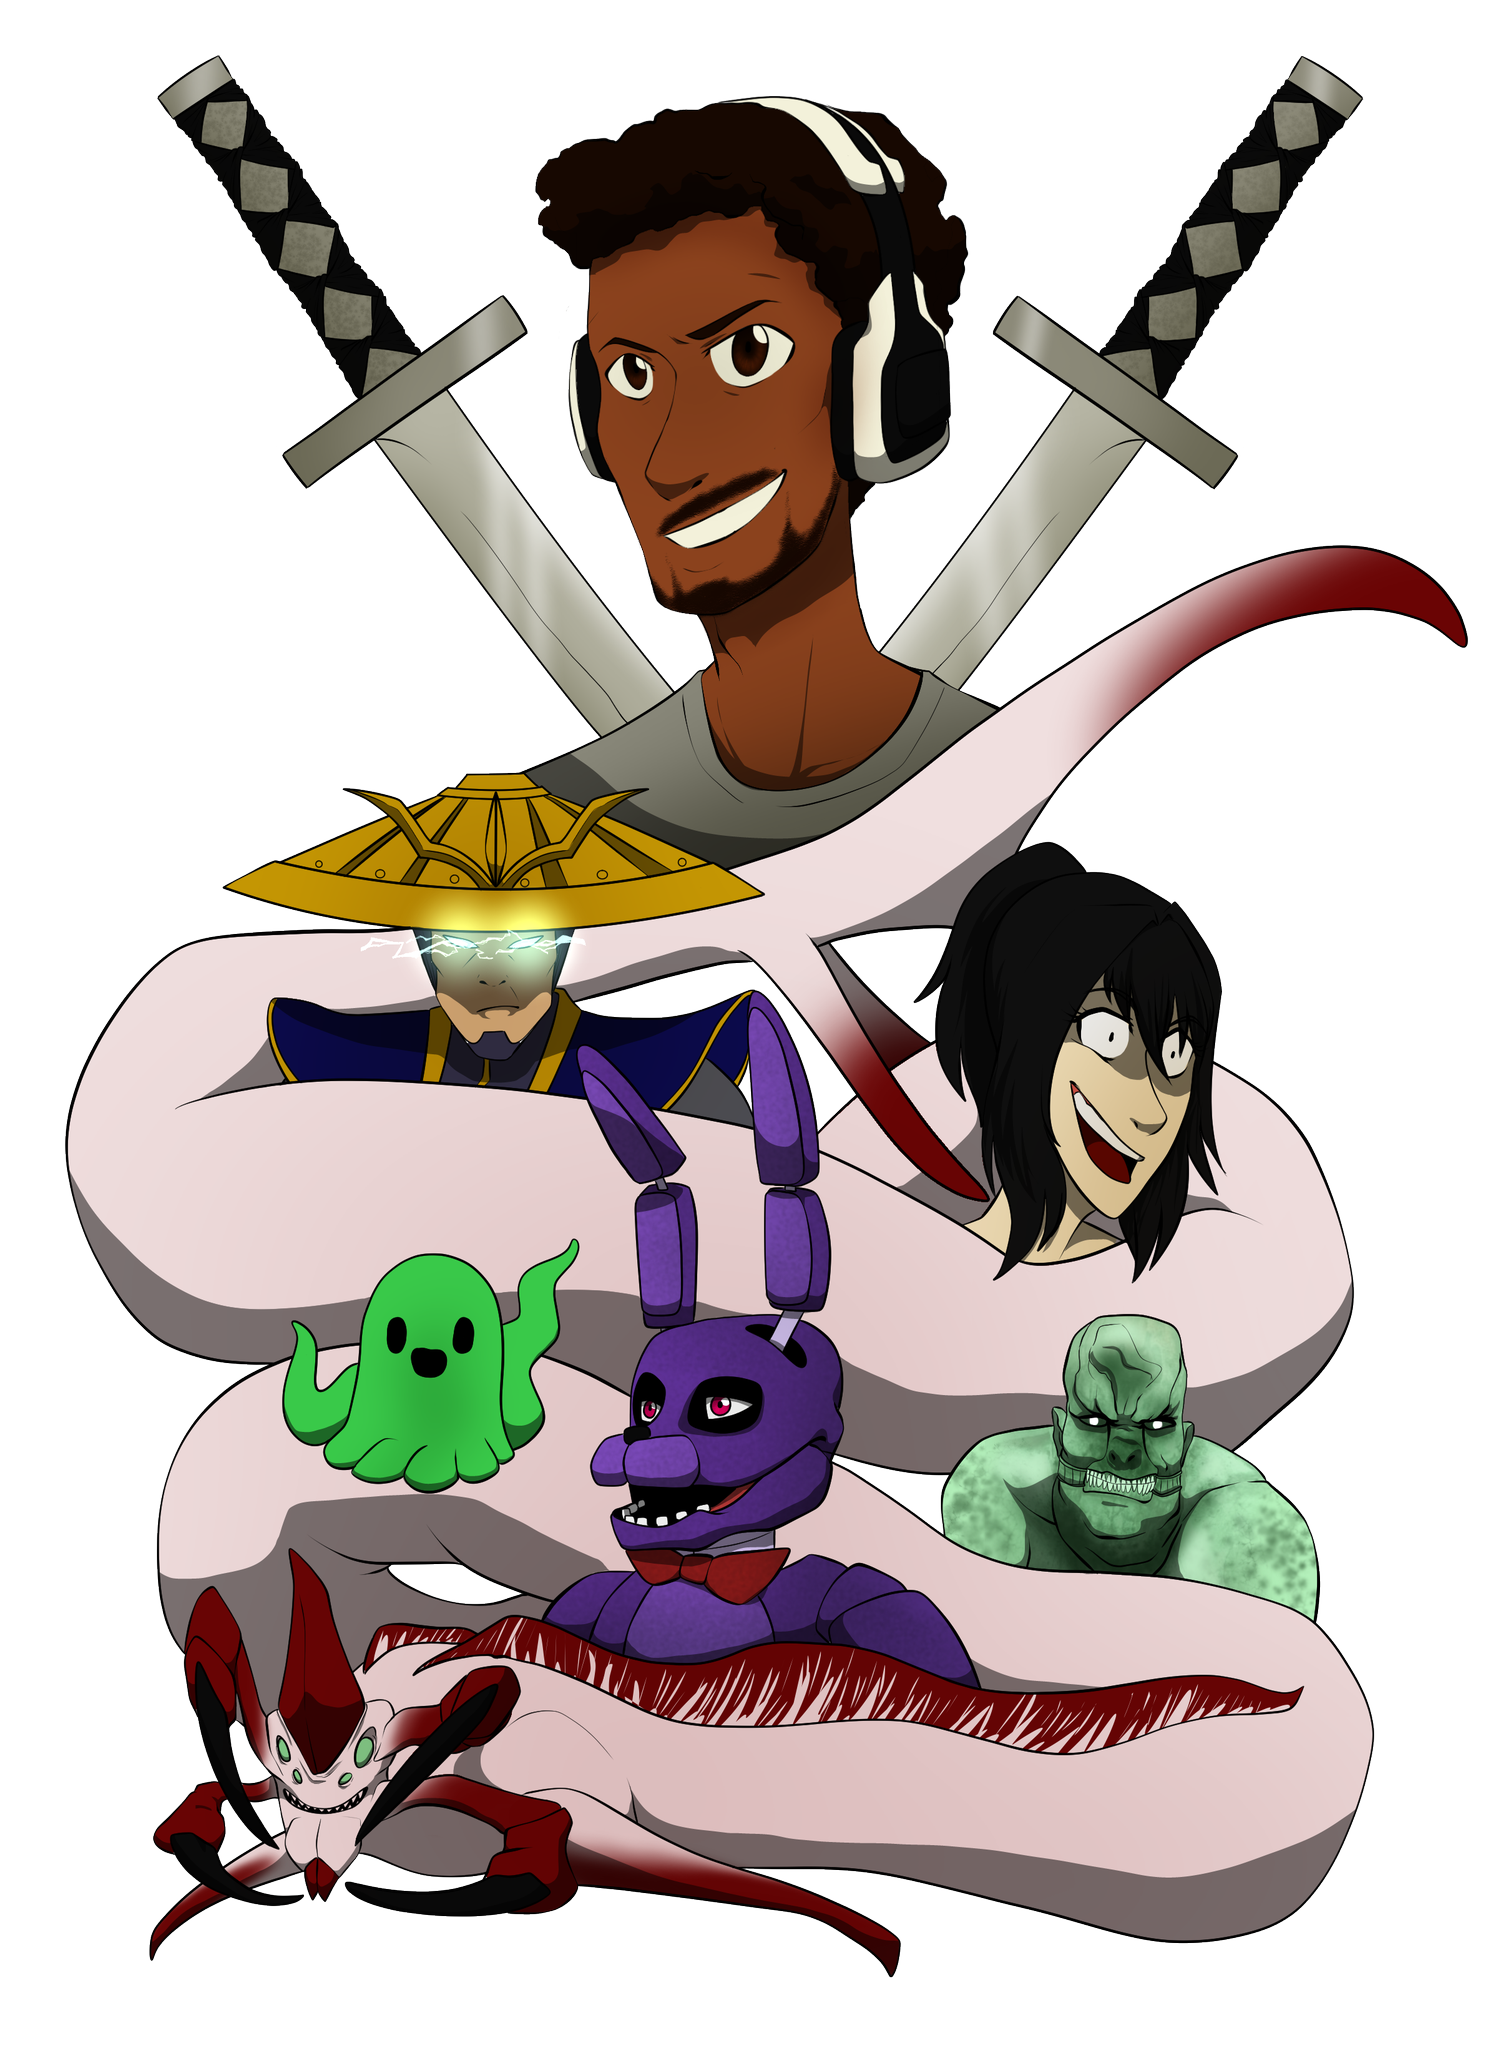 “@CoryxKenshin Made some fanart :D I may turn it in to a T-Shirt one day. 